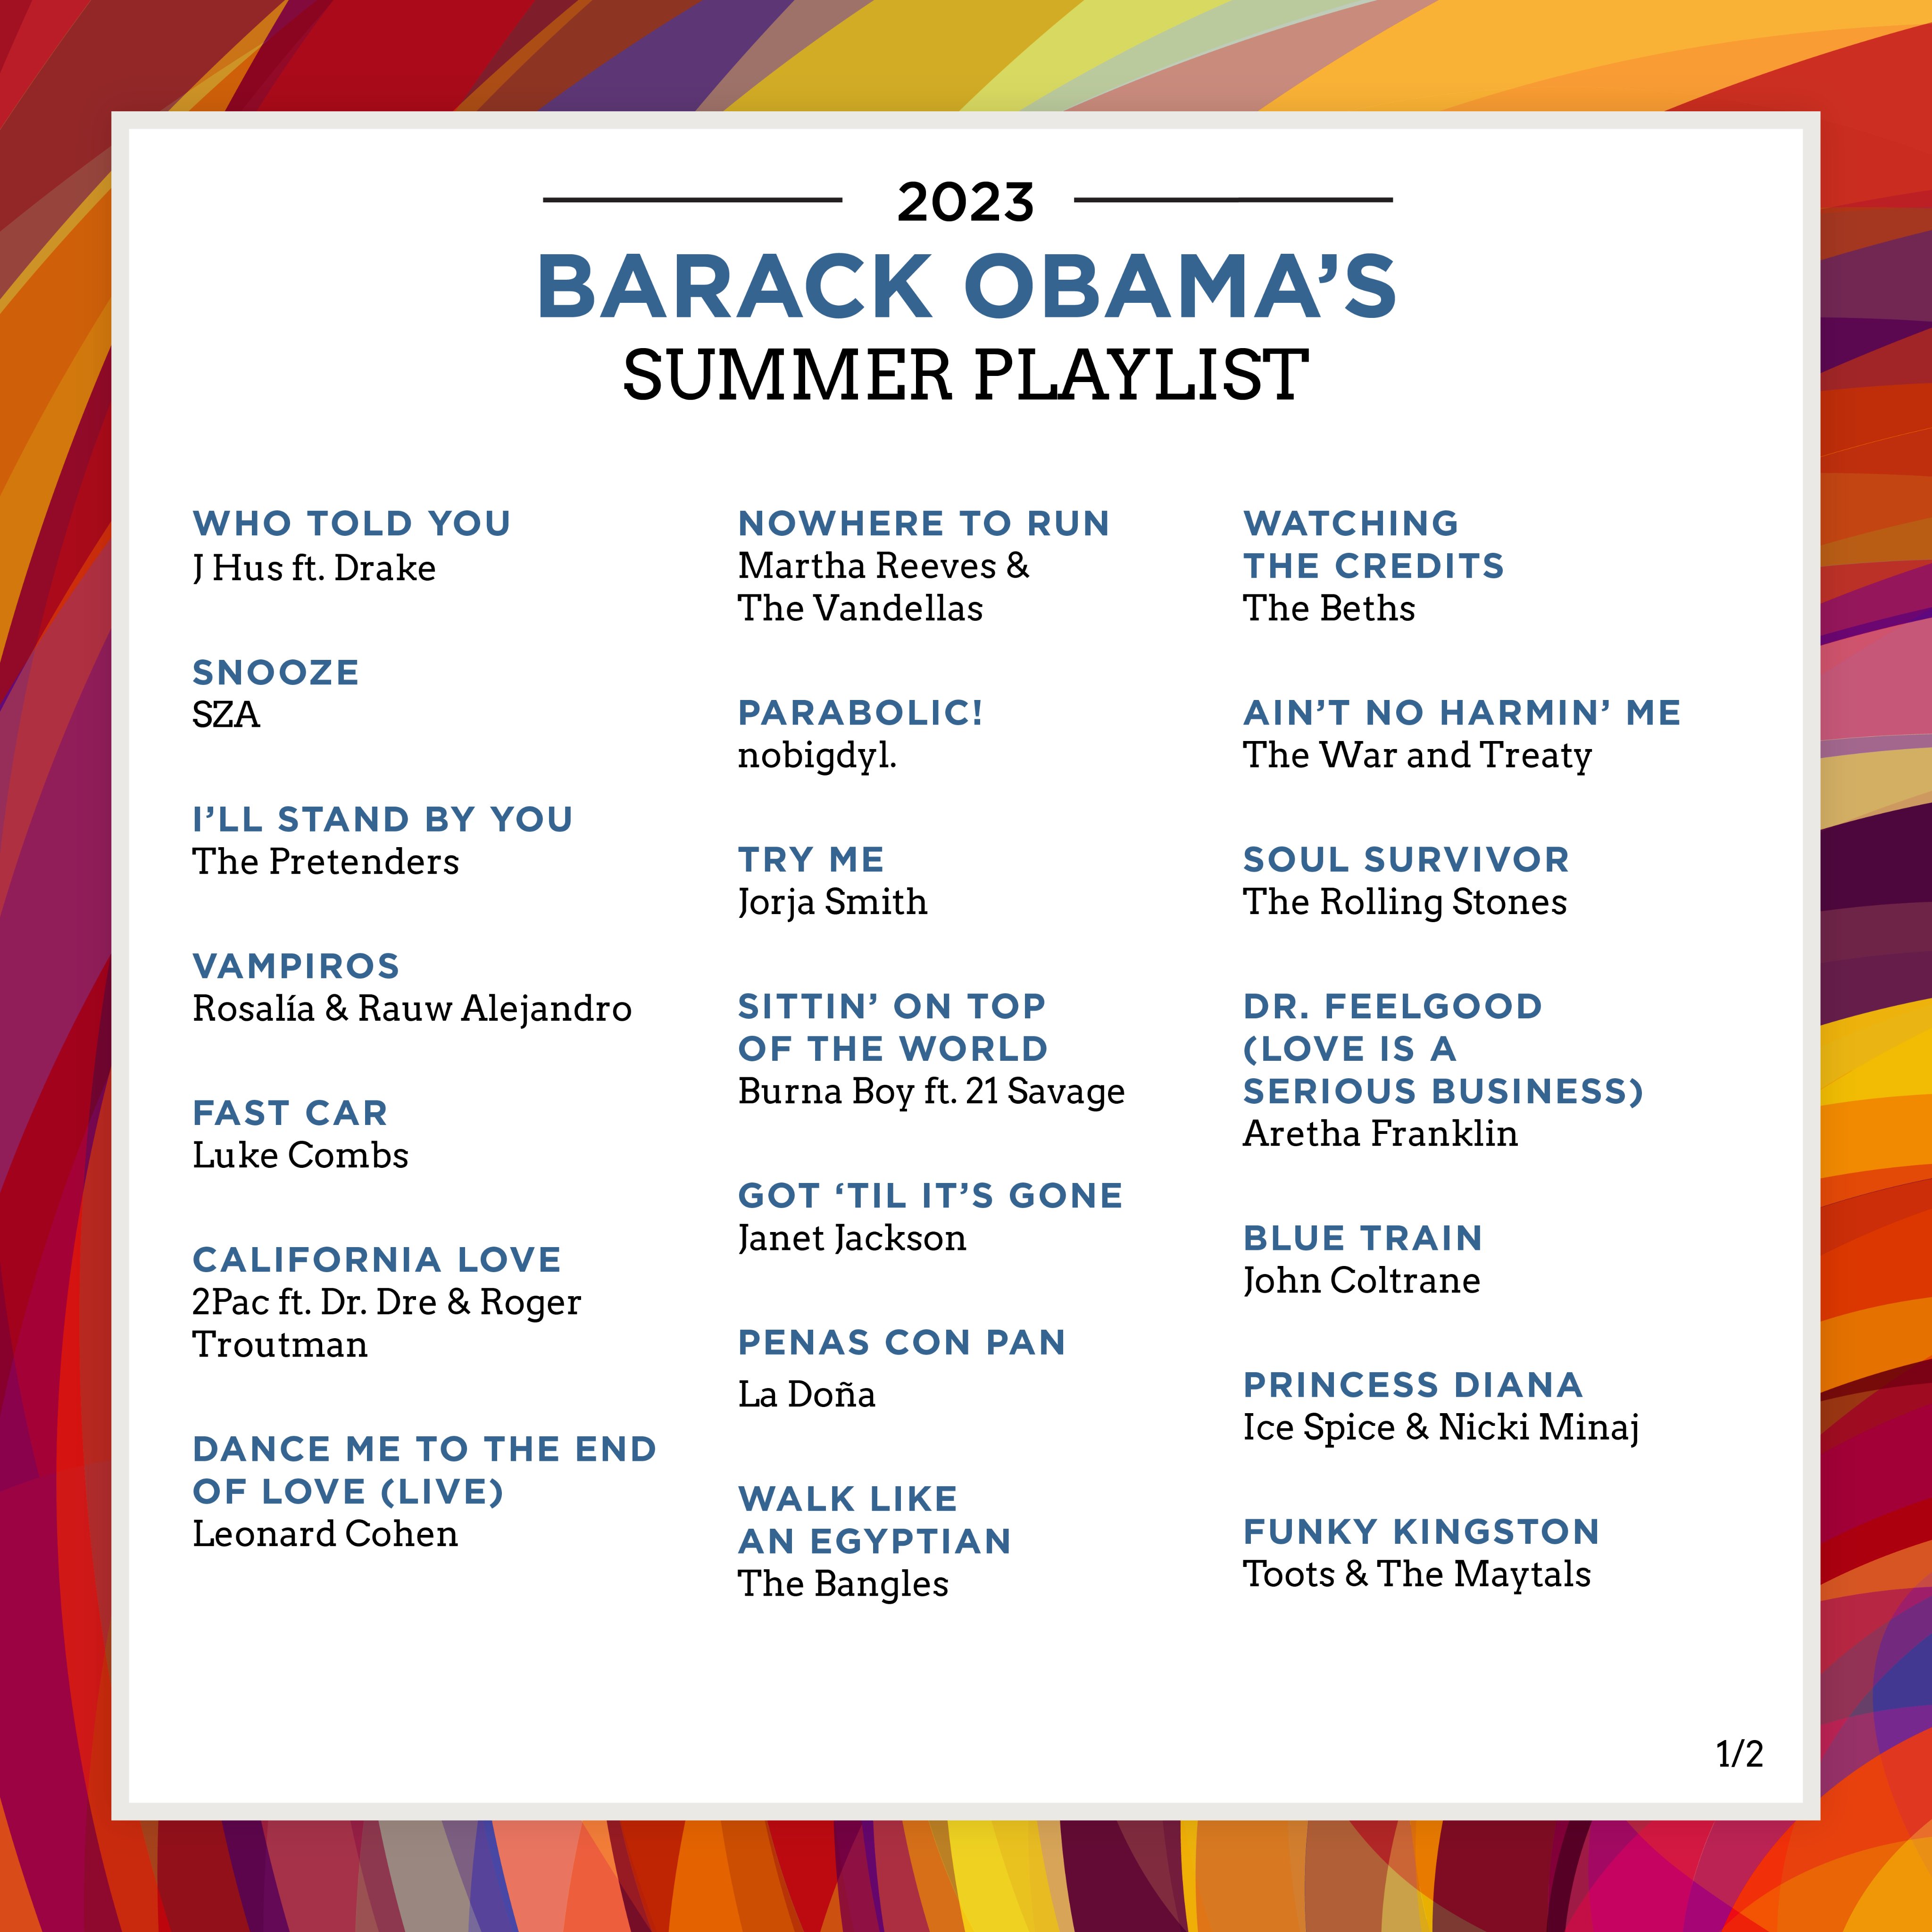 Obama’s Summer Playlist: Drake, Money Man, Ice Spice, and More